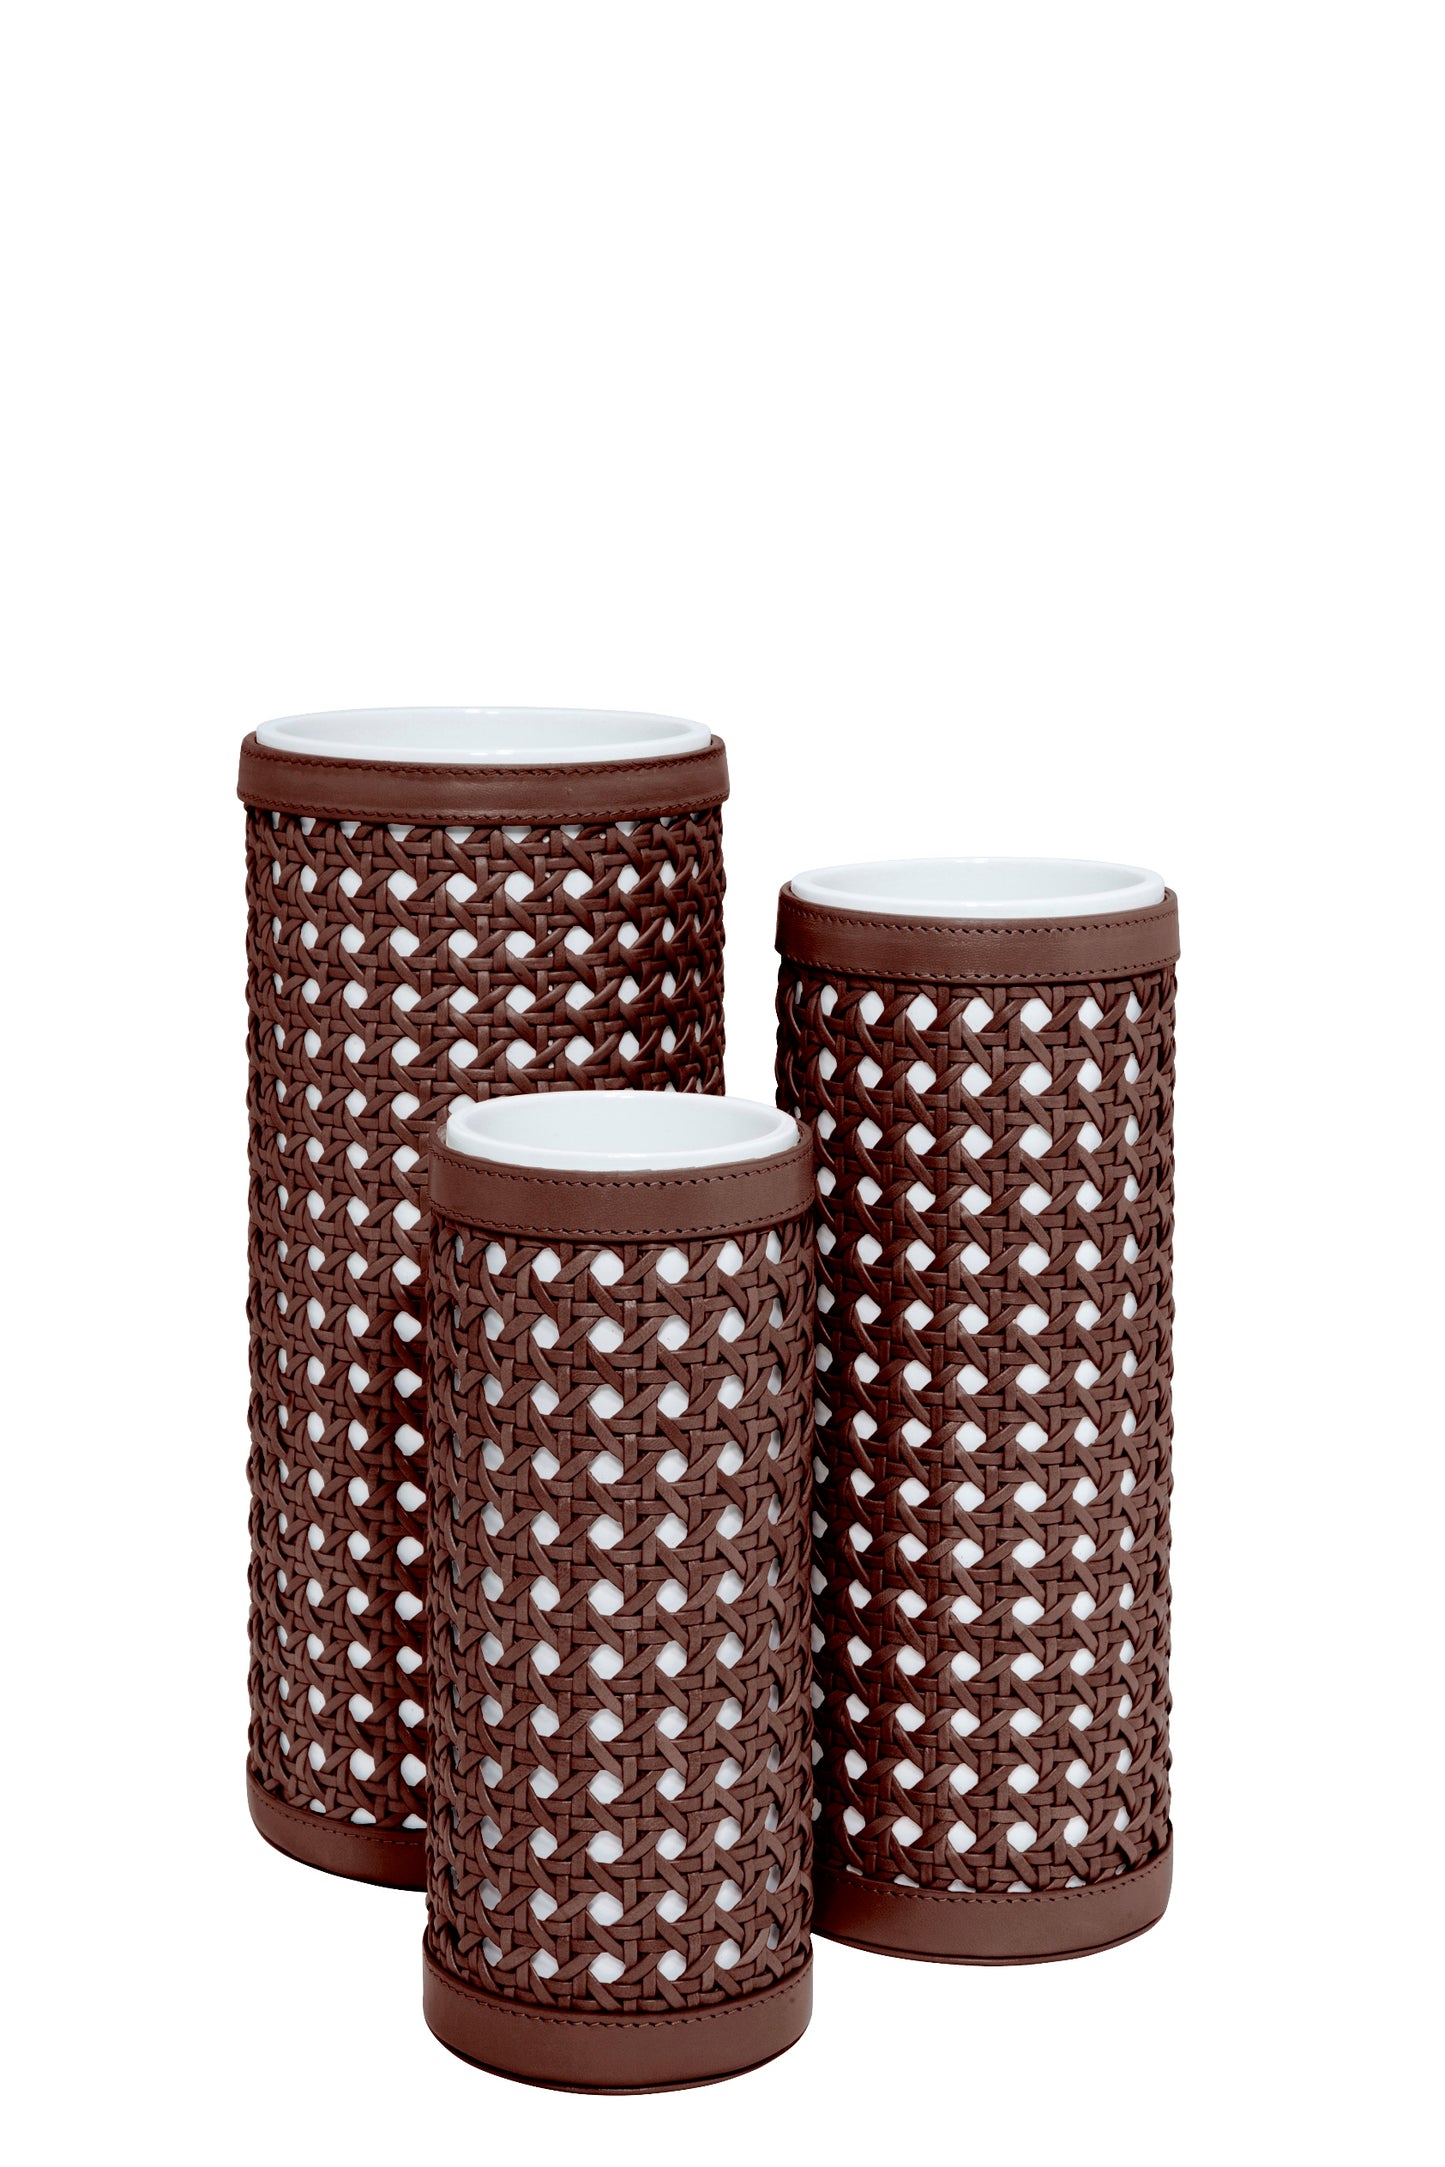 Riviere Ester Ceramic Vase With Removable Hand-Braided Leather Cover | Elegant Ceramic Vase Design | Hand-Braided Leather Cover for a Unique Touch | Elevate Your Home Decor with Riviere's Exquisite Accessories | Available at 2Jour Concierge, #1 luxury high-end gift & lifestyle shop